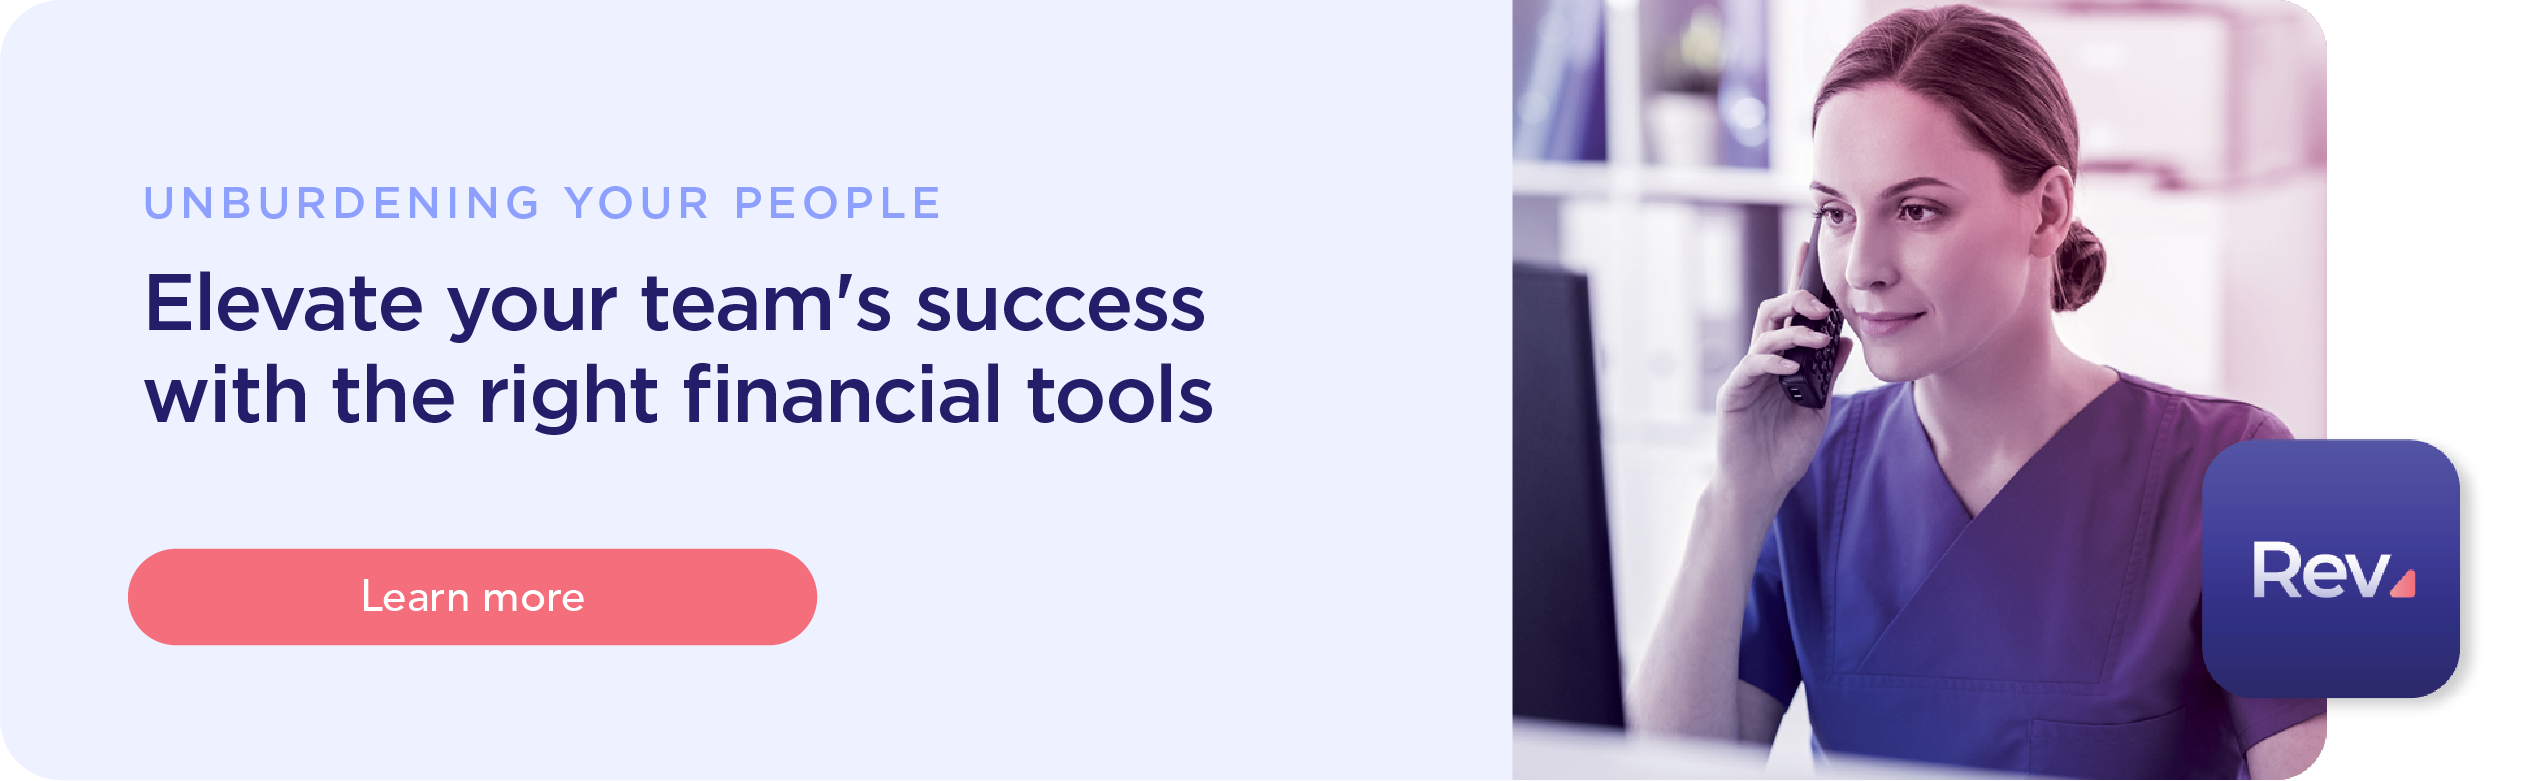 Elevate your team's success with the right financial tools. Learn more at our unburdening your people landing page.